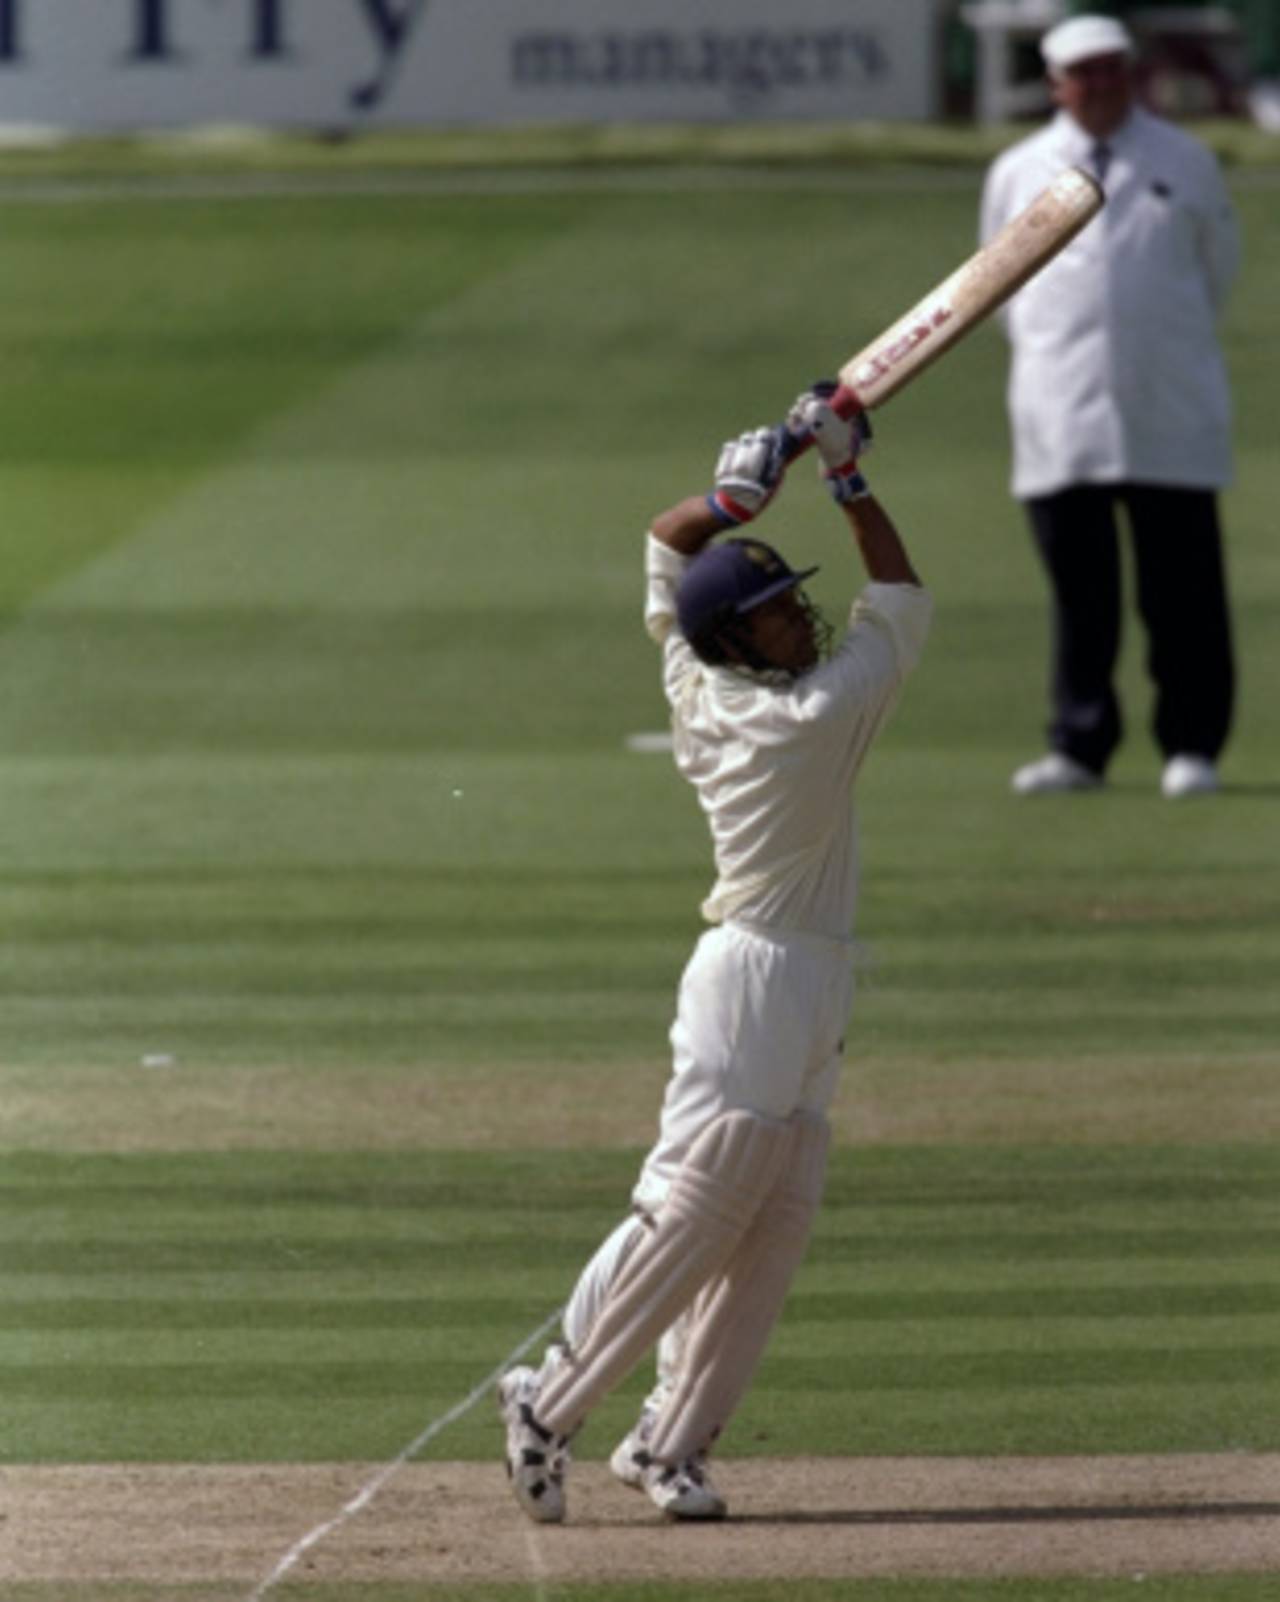 Sachin Tendulkar lofts one straight down the ground, MCC v Rest of the World XI, Princess of Wales Memorial match, Lord's, July 18, 1998